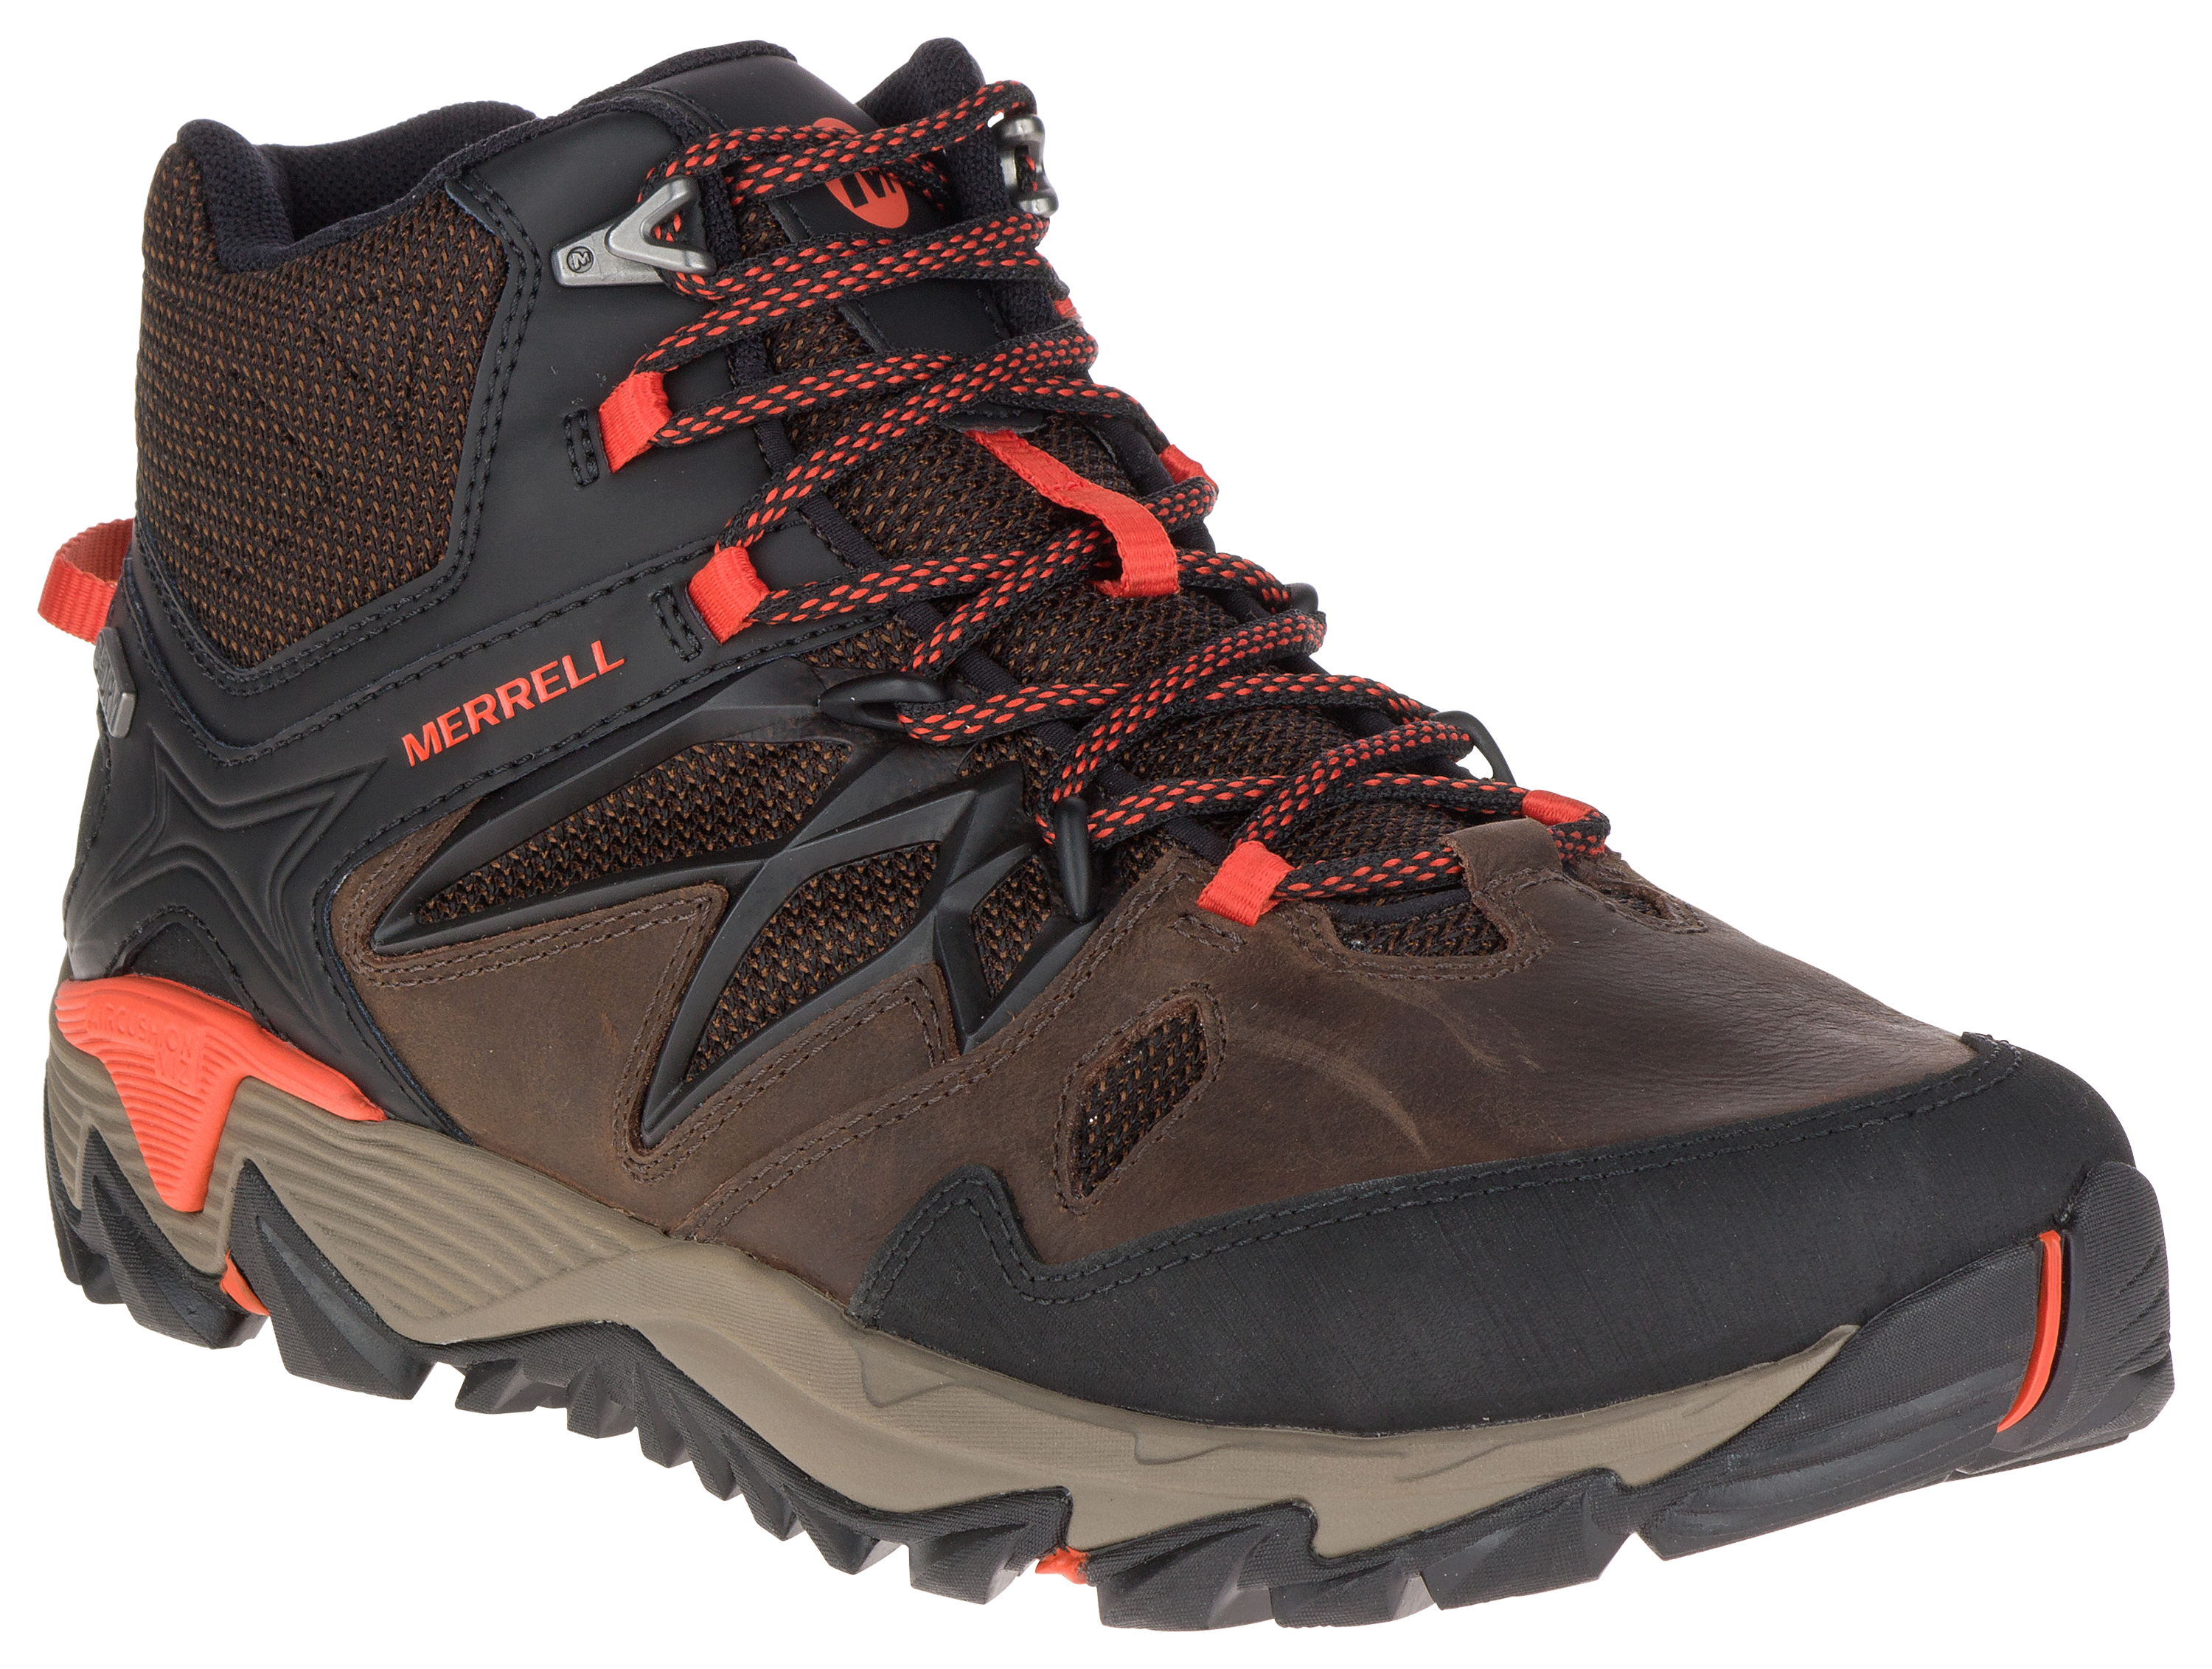 Merrell All Out Blaze 2 Mid Waterproof Hiking Boots for Men | Bass Pro ...